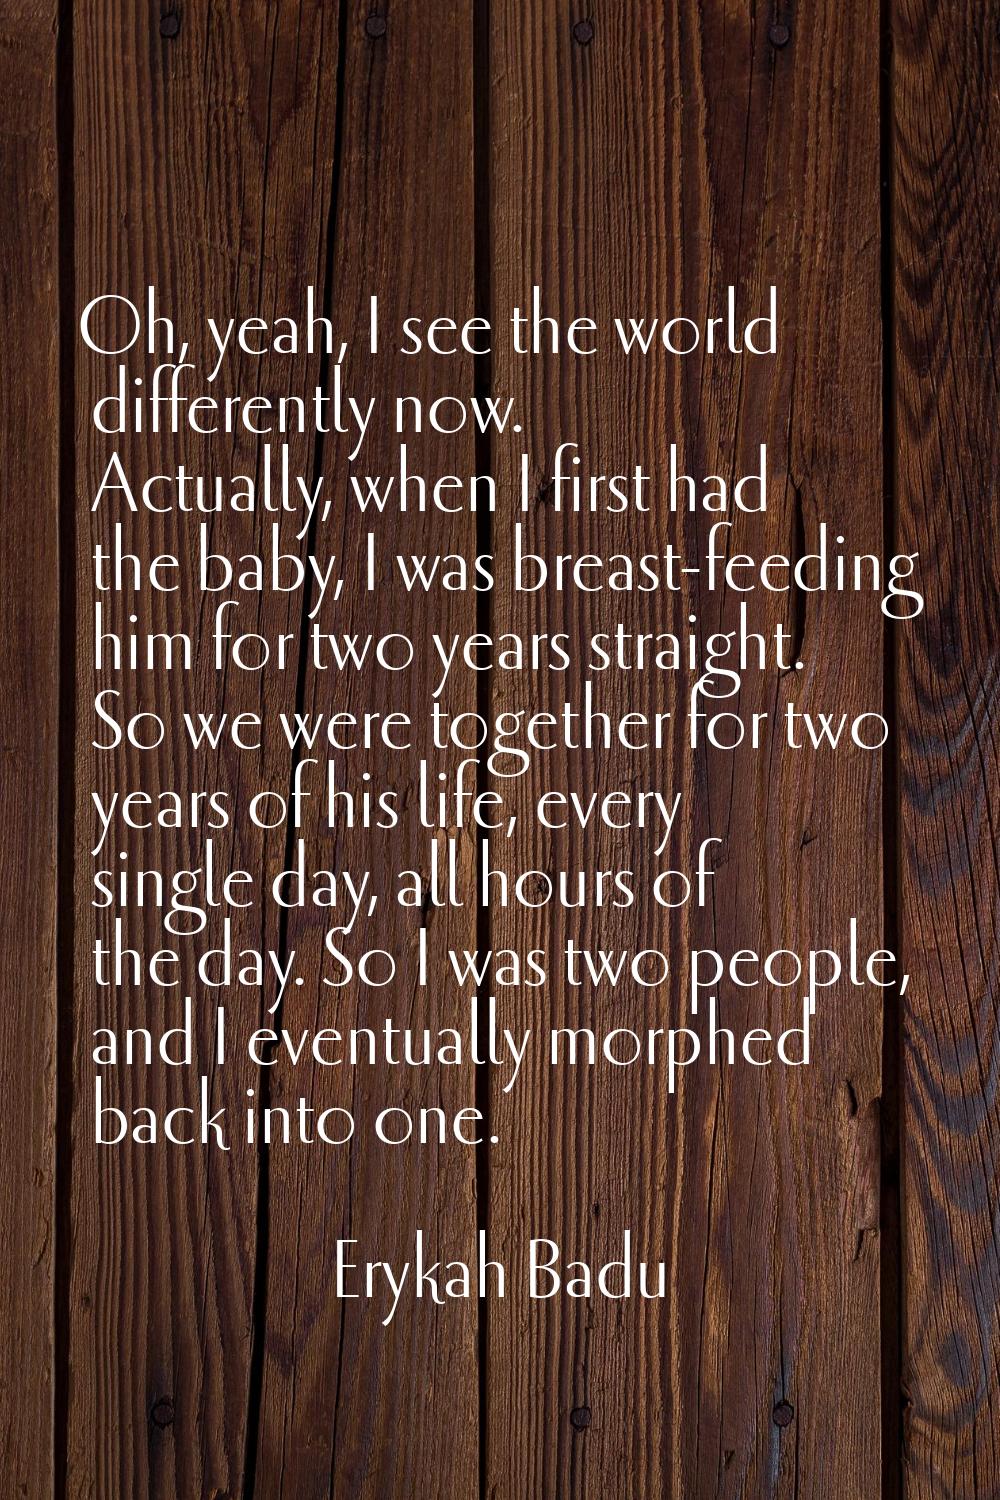 Oh, yeah, I see the world differently now. Actually, when I first had the baby, I was breast-feedin